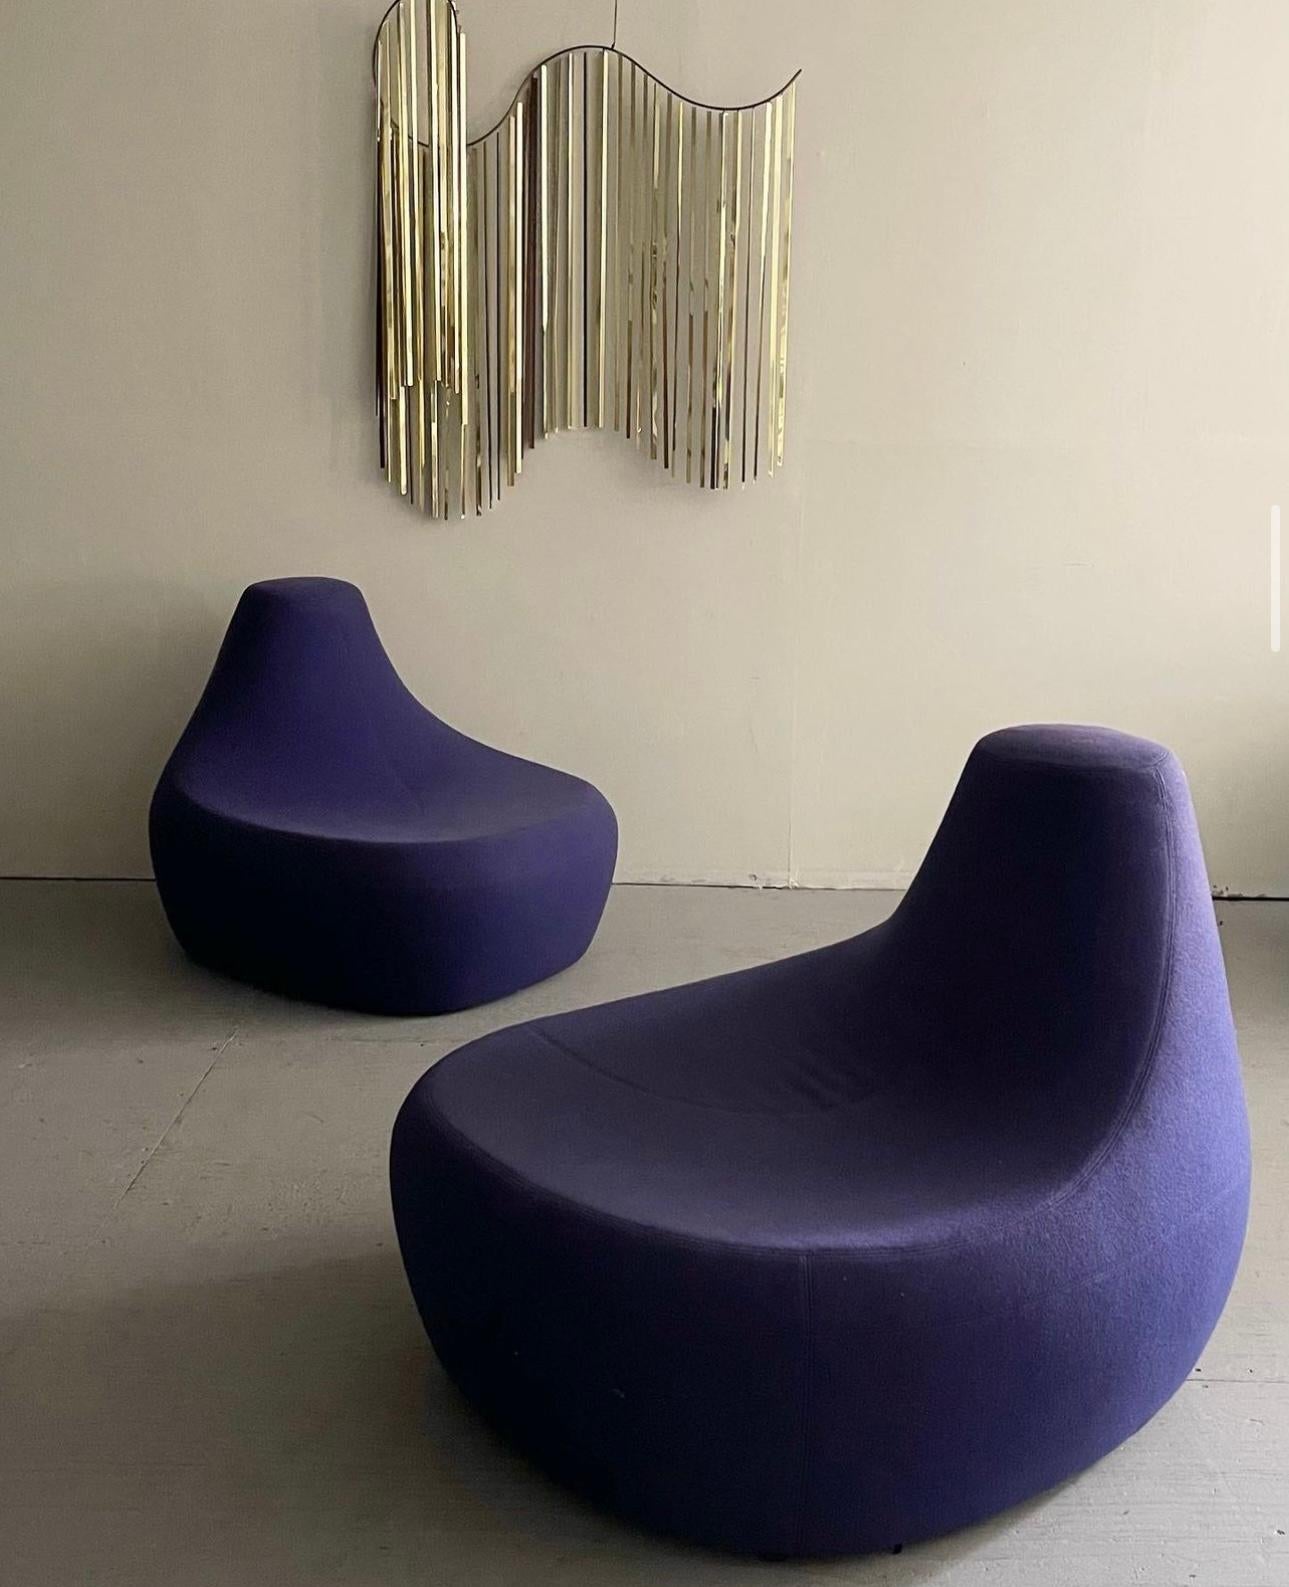 “Saruyama” Island Lounge Chairs Designed By Toshiyuki Kita For Moroso. These uniquely designed vintage lounge chairs offer a geomorphic shape with seats wide enough to fit two people. Both come wrapped in their original deep purple upholstery. The